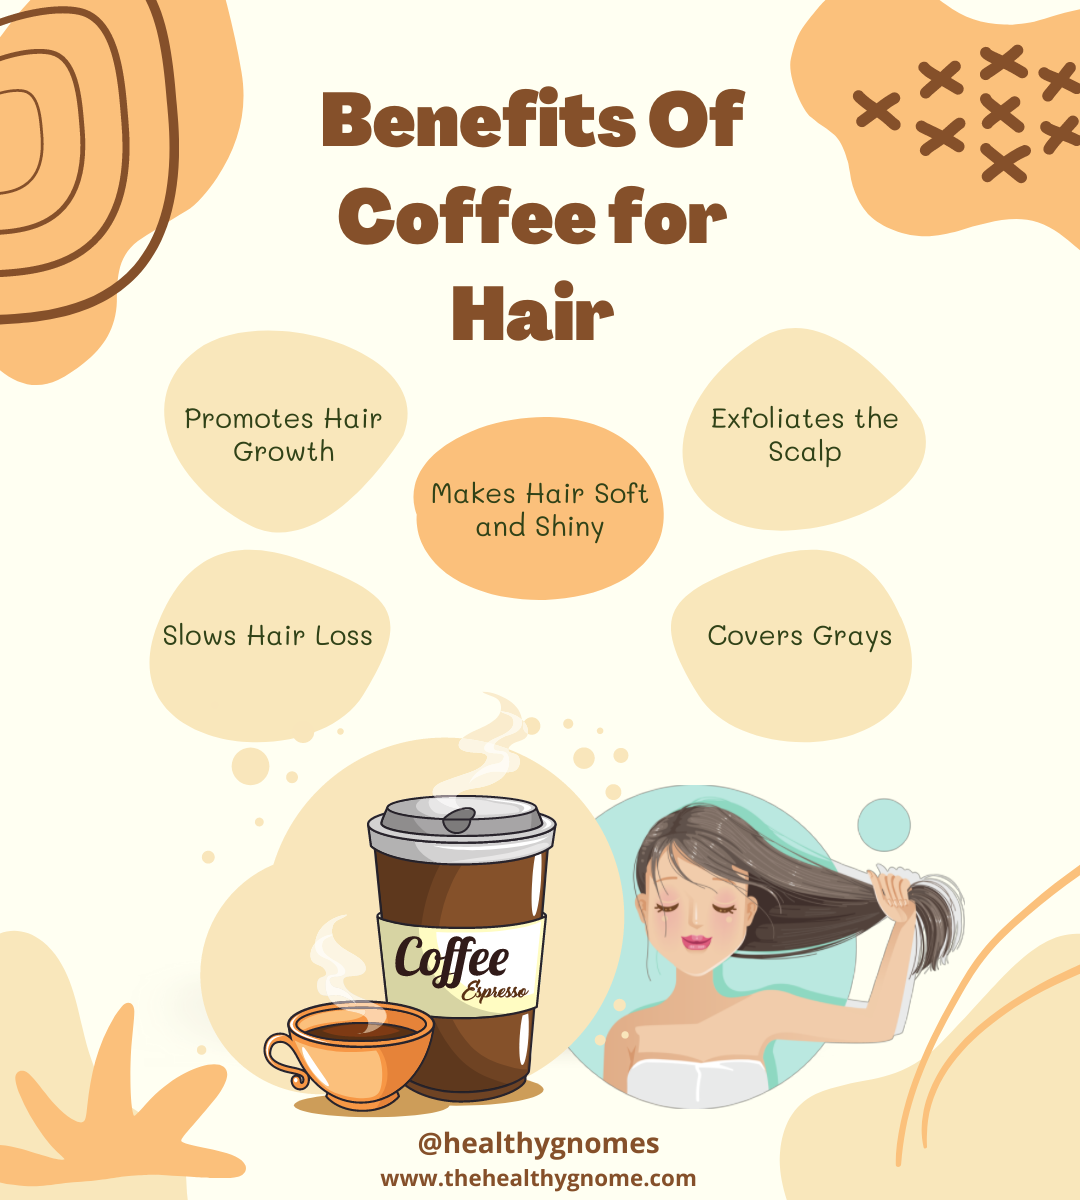 Coffee benefits for hair